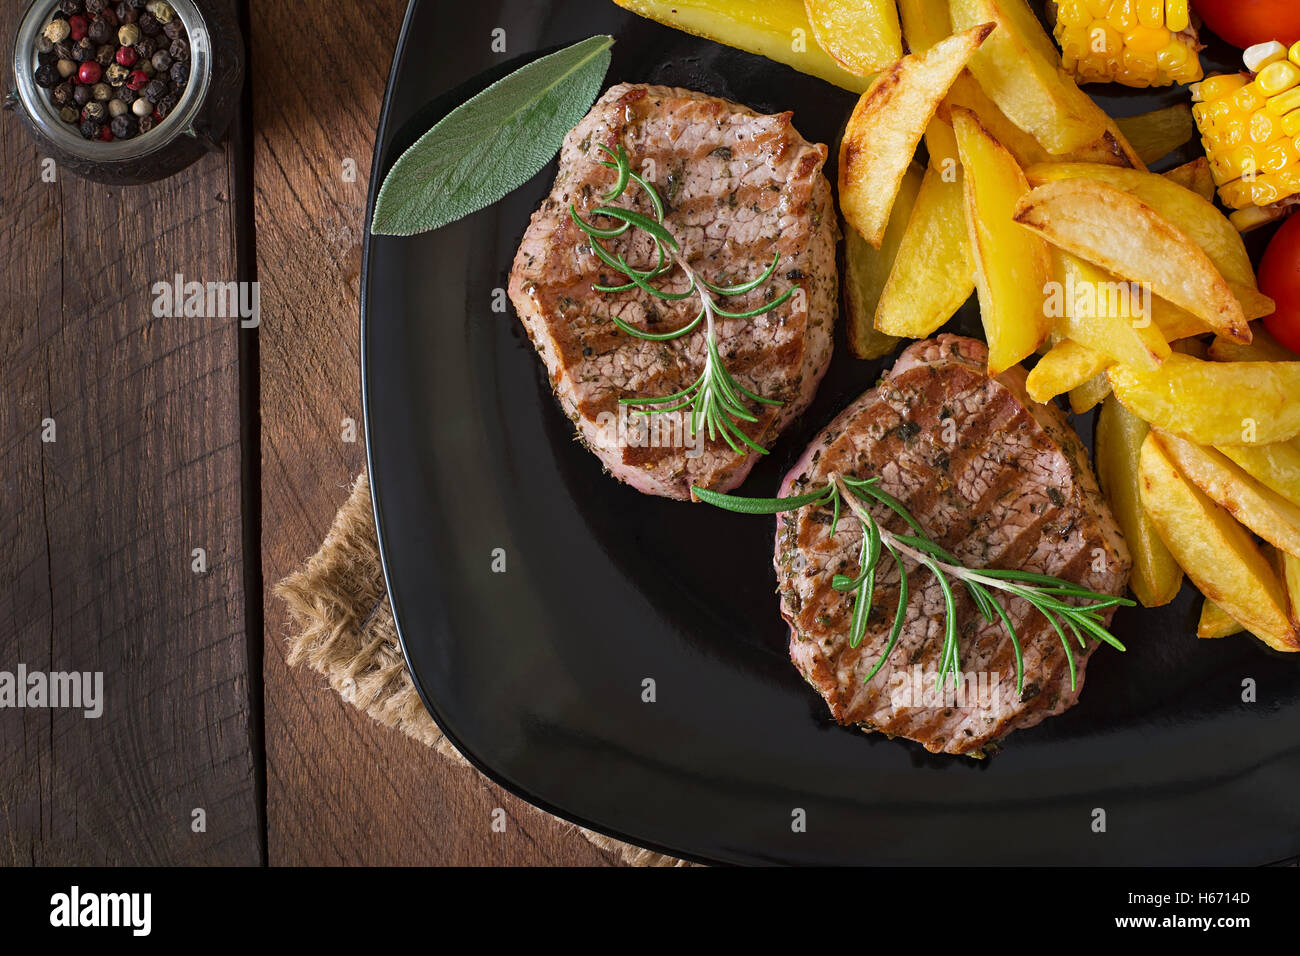 Tender and juicy veal steak medium rare with French fries. Top view Stock Photo